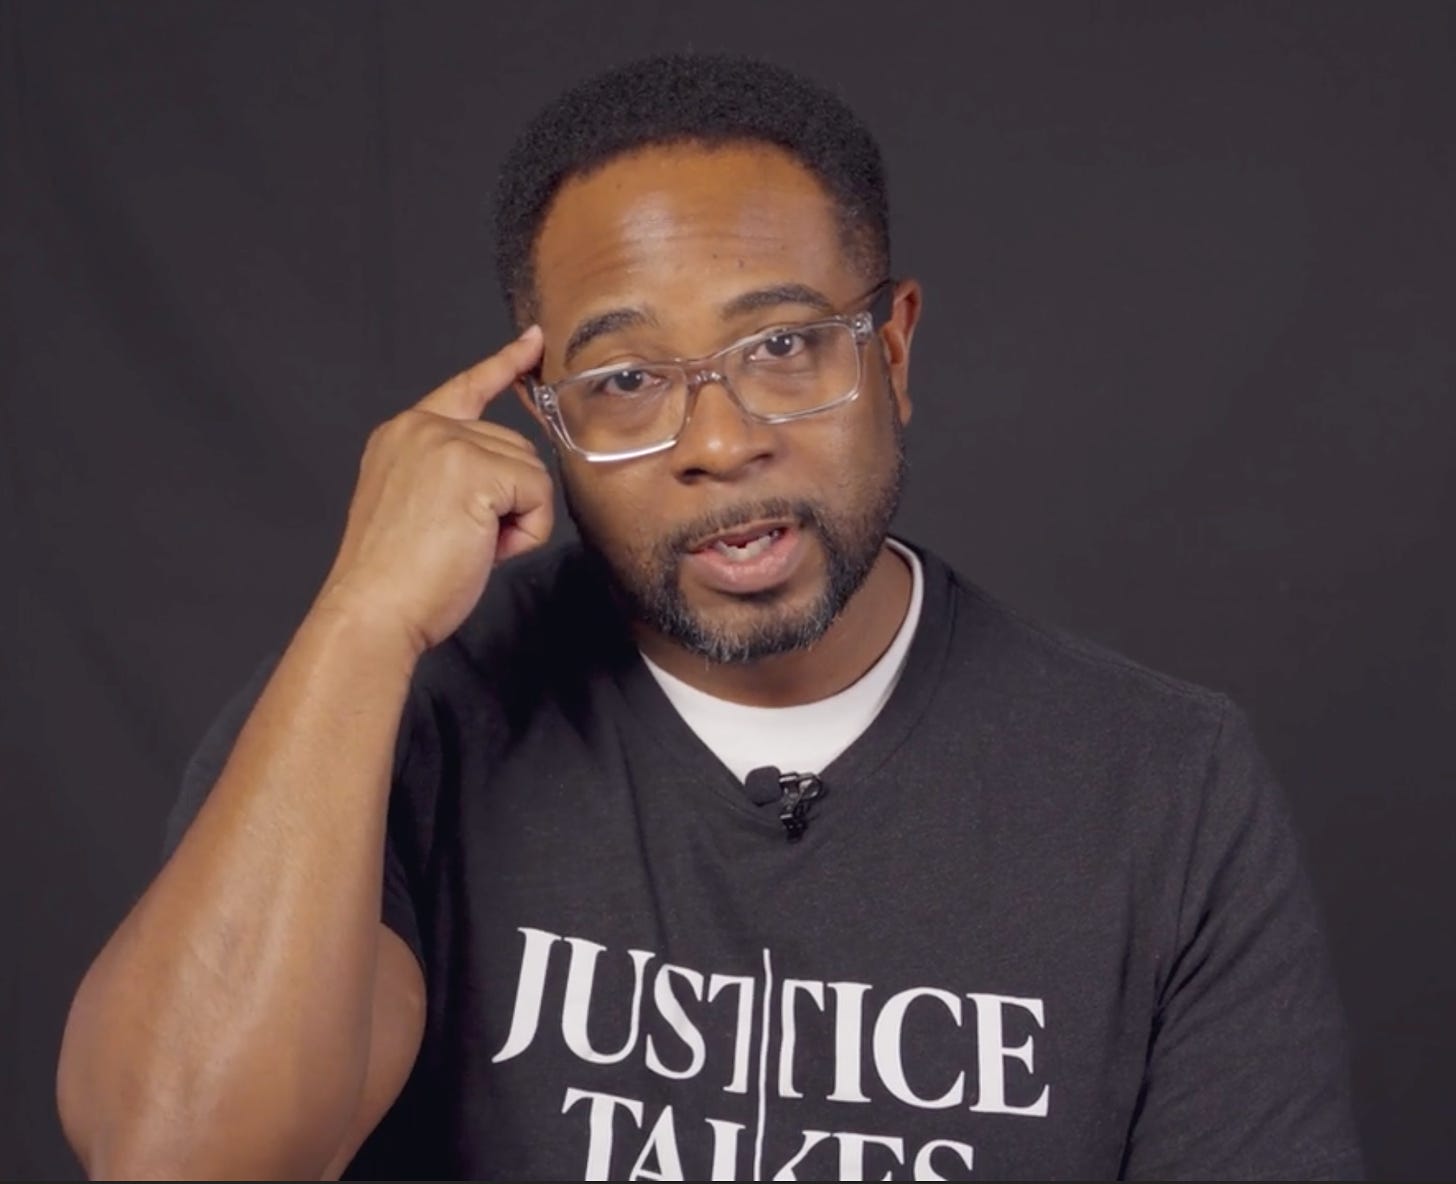 Jemar Tisby in Justice Takes Sides t-shirt in front of black background